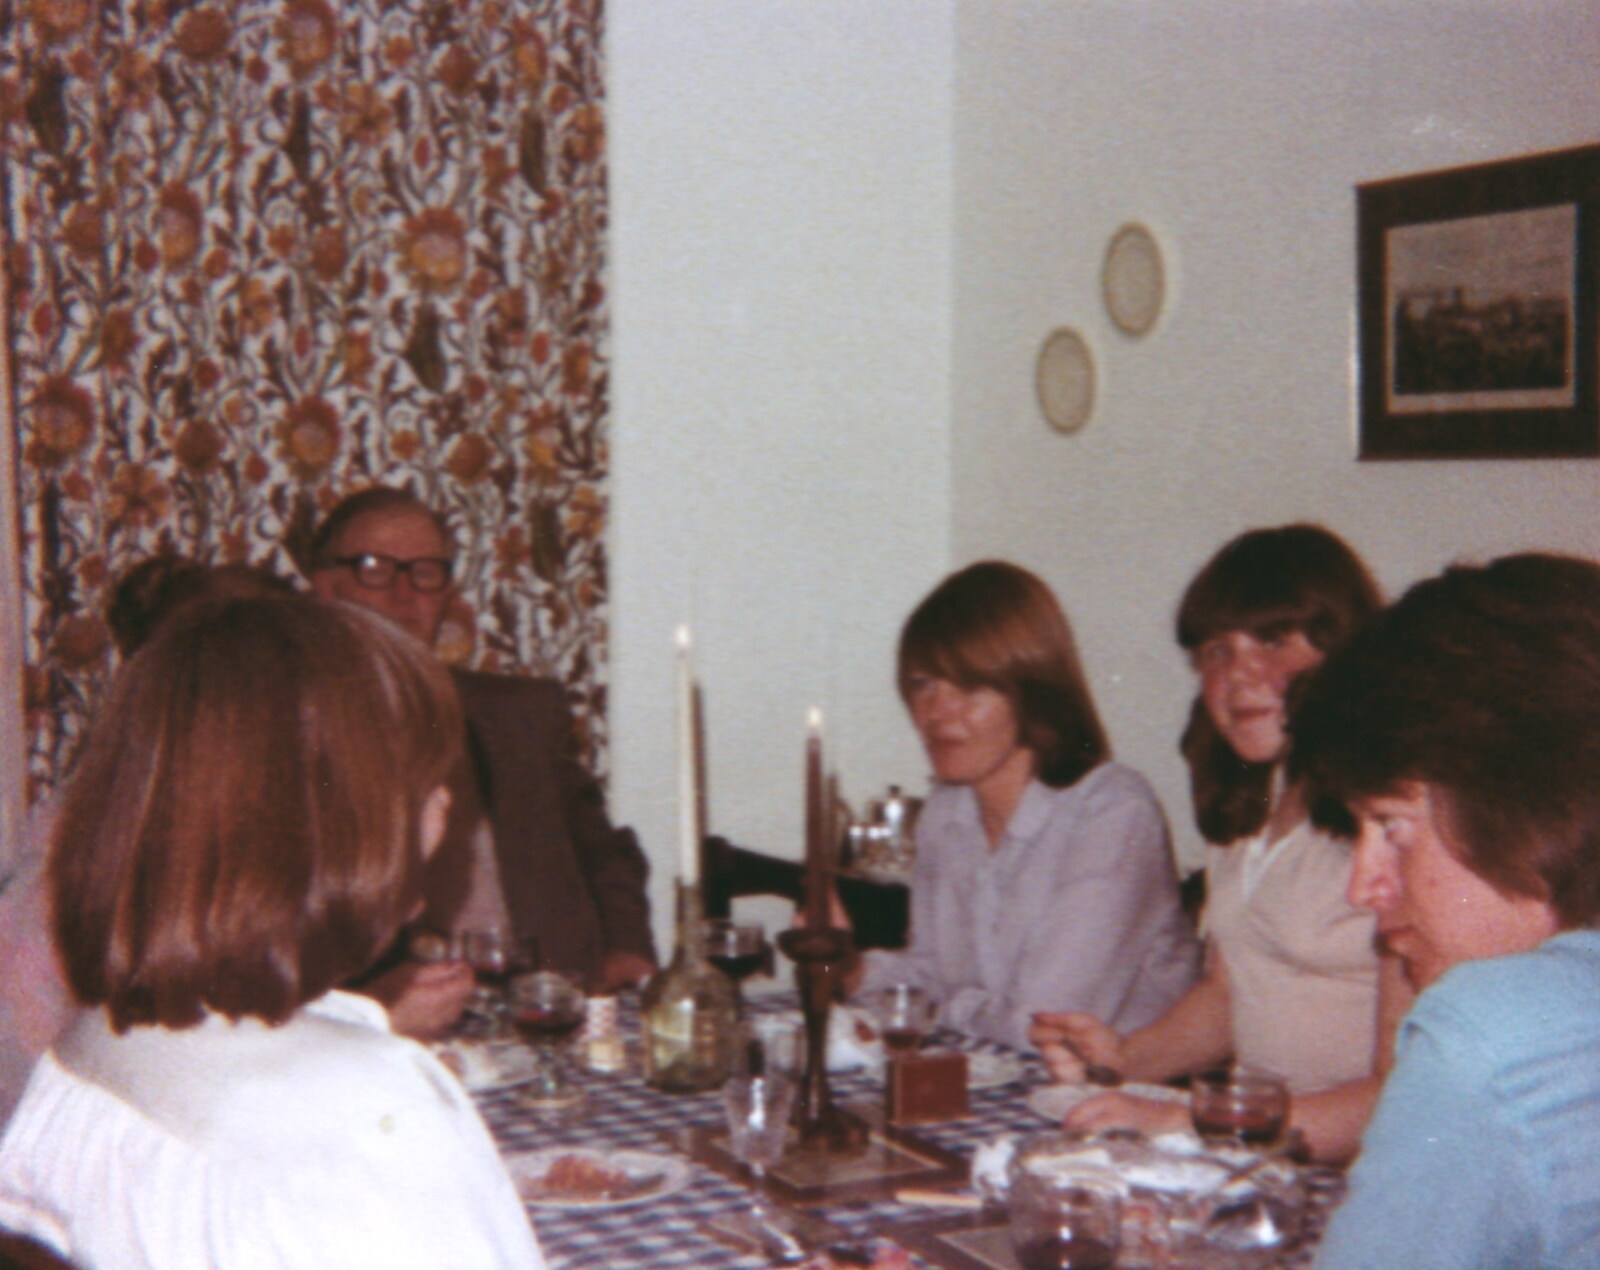 Dinner time from Family History: Danesbury Avenue, Tuckton, Christchurch, Dorset - 24th January 2020